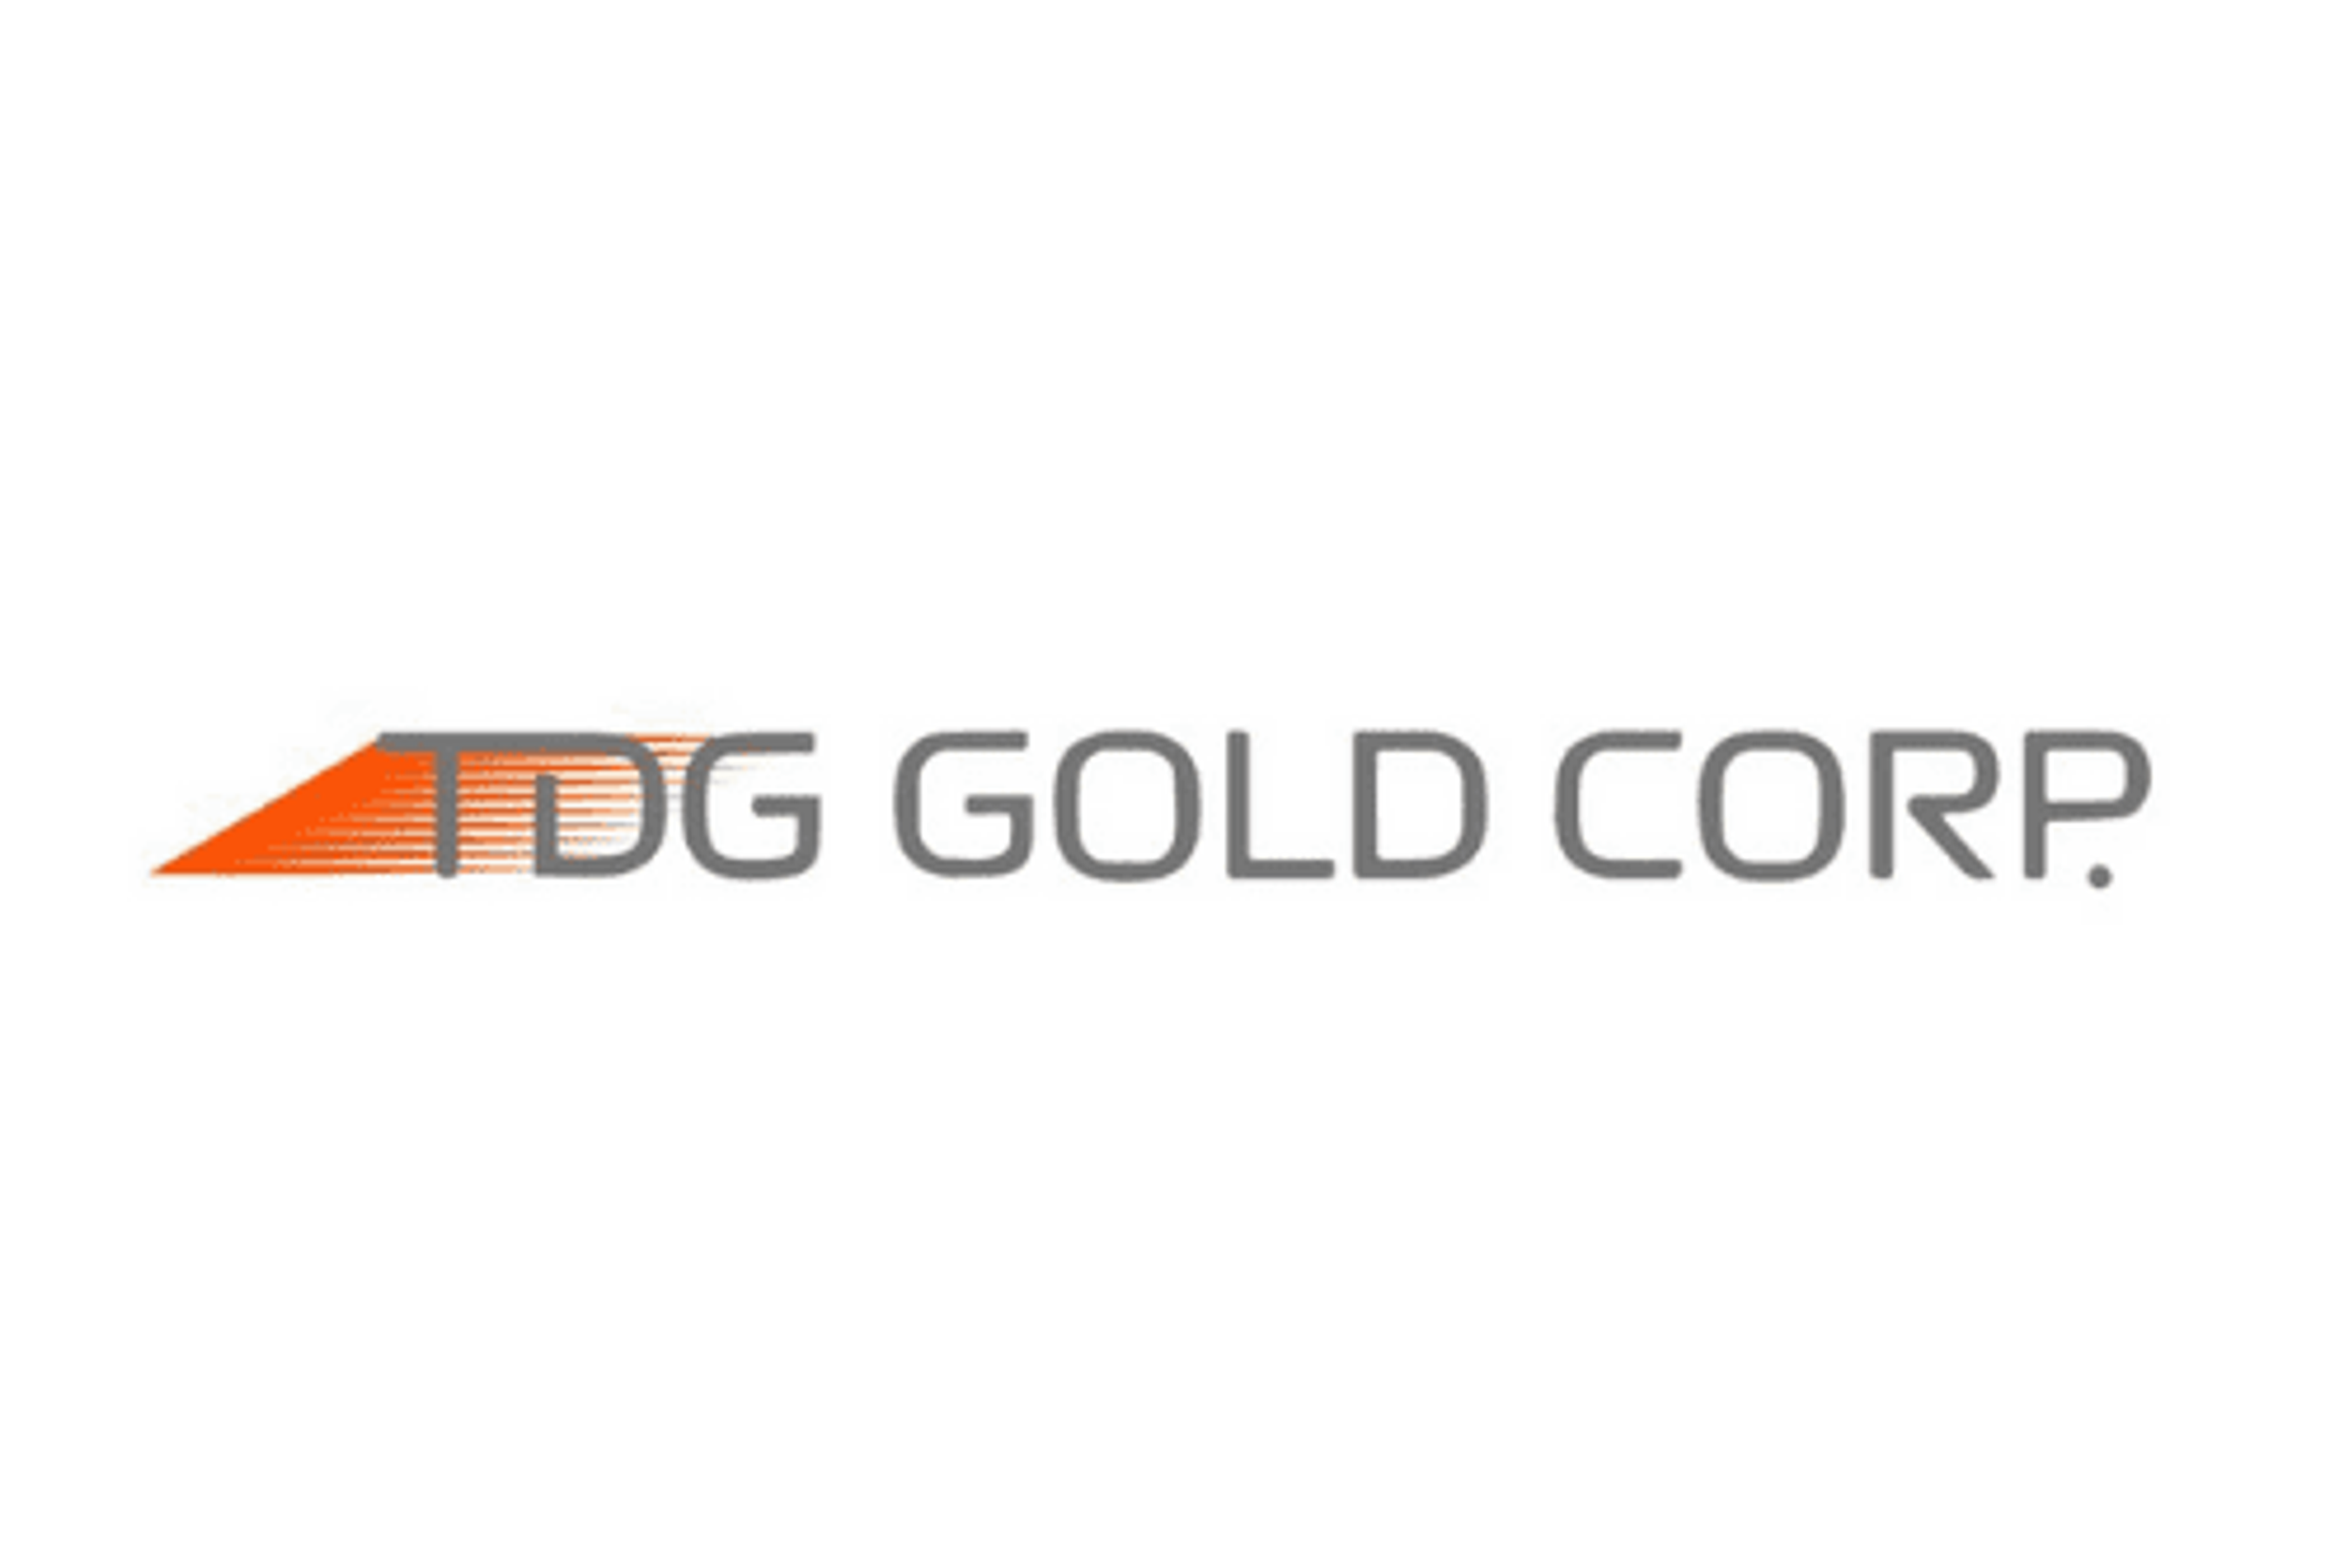 TDG Gold Corp. Samples Up To 32.9 g/t And 27.6 g/t Gold at Mets, Toodoggone, B.C.